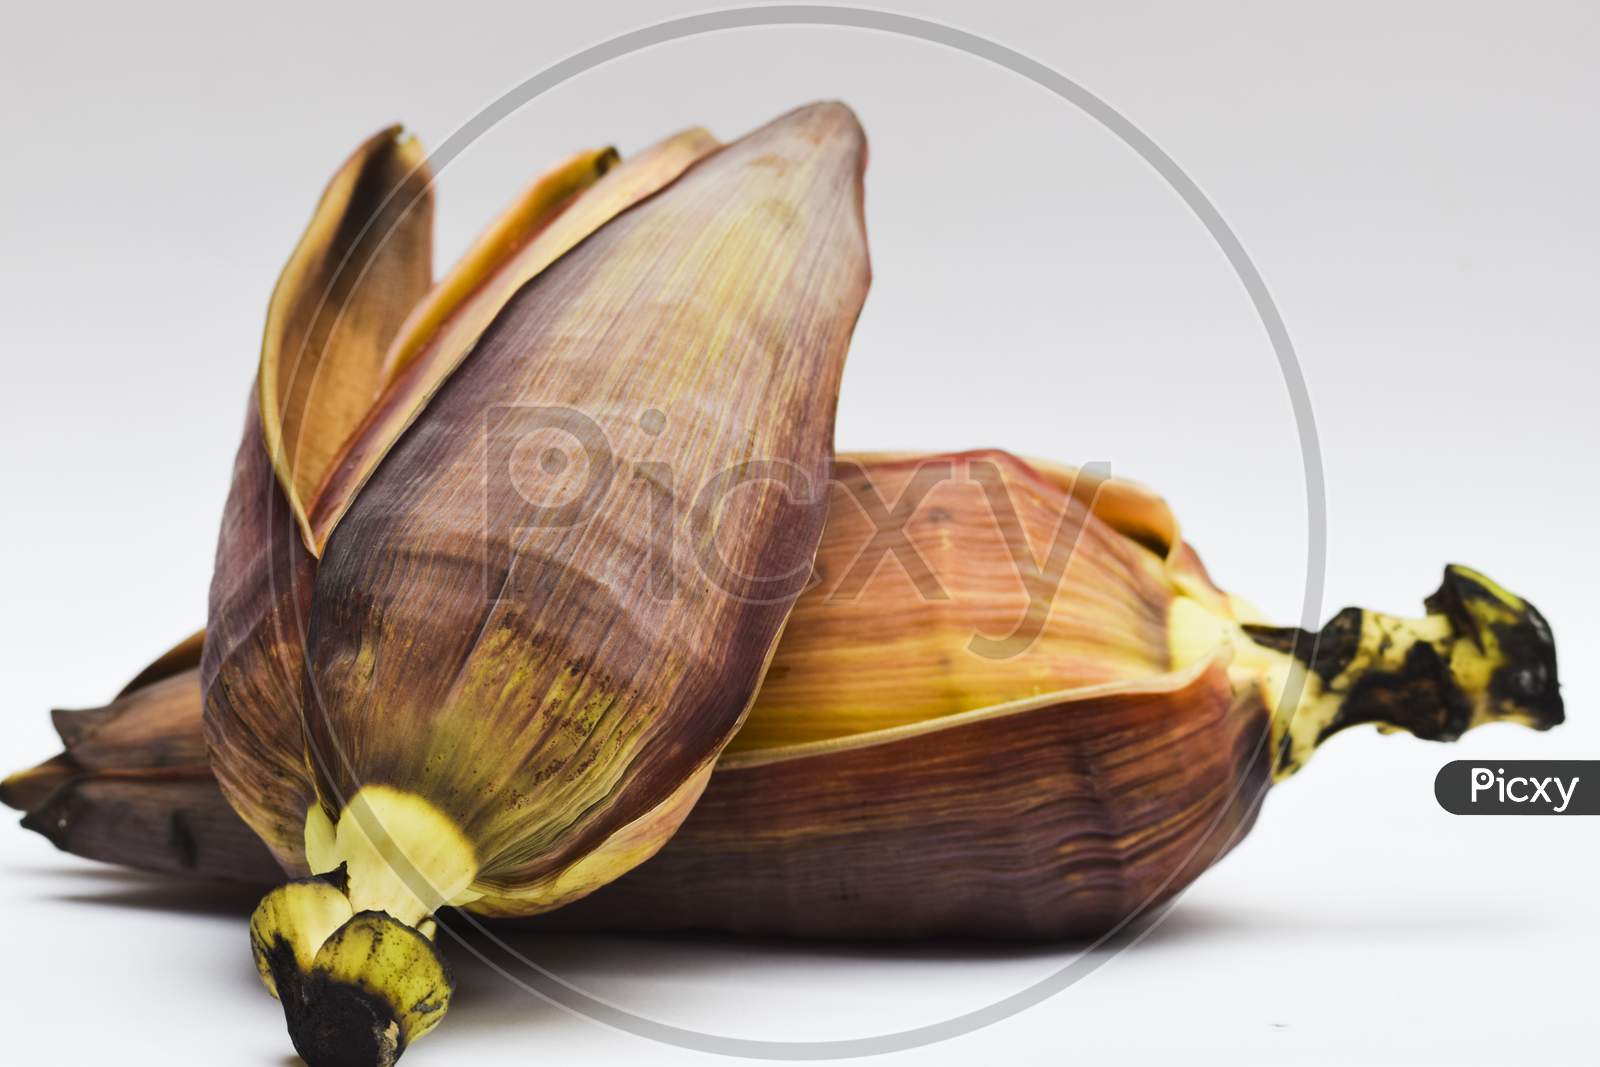 Raw Banana Flower Also Known As Banana Blossom Or Banana Heart On White Background. Curry Sabji South Indian Or Pakistani Or Nepali Vegetable Exotic Traditional